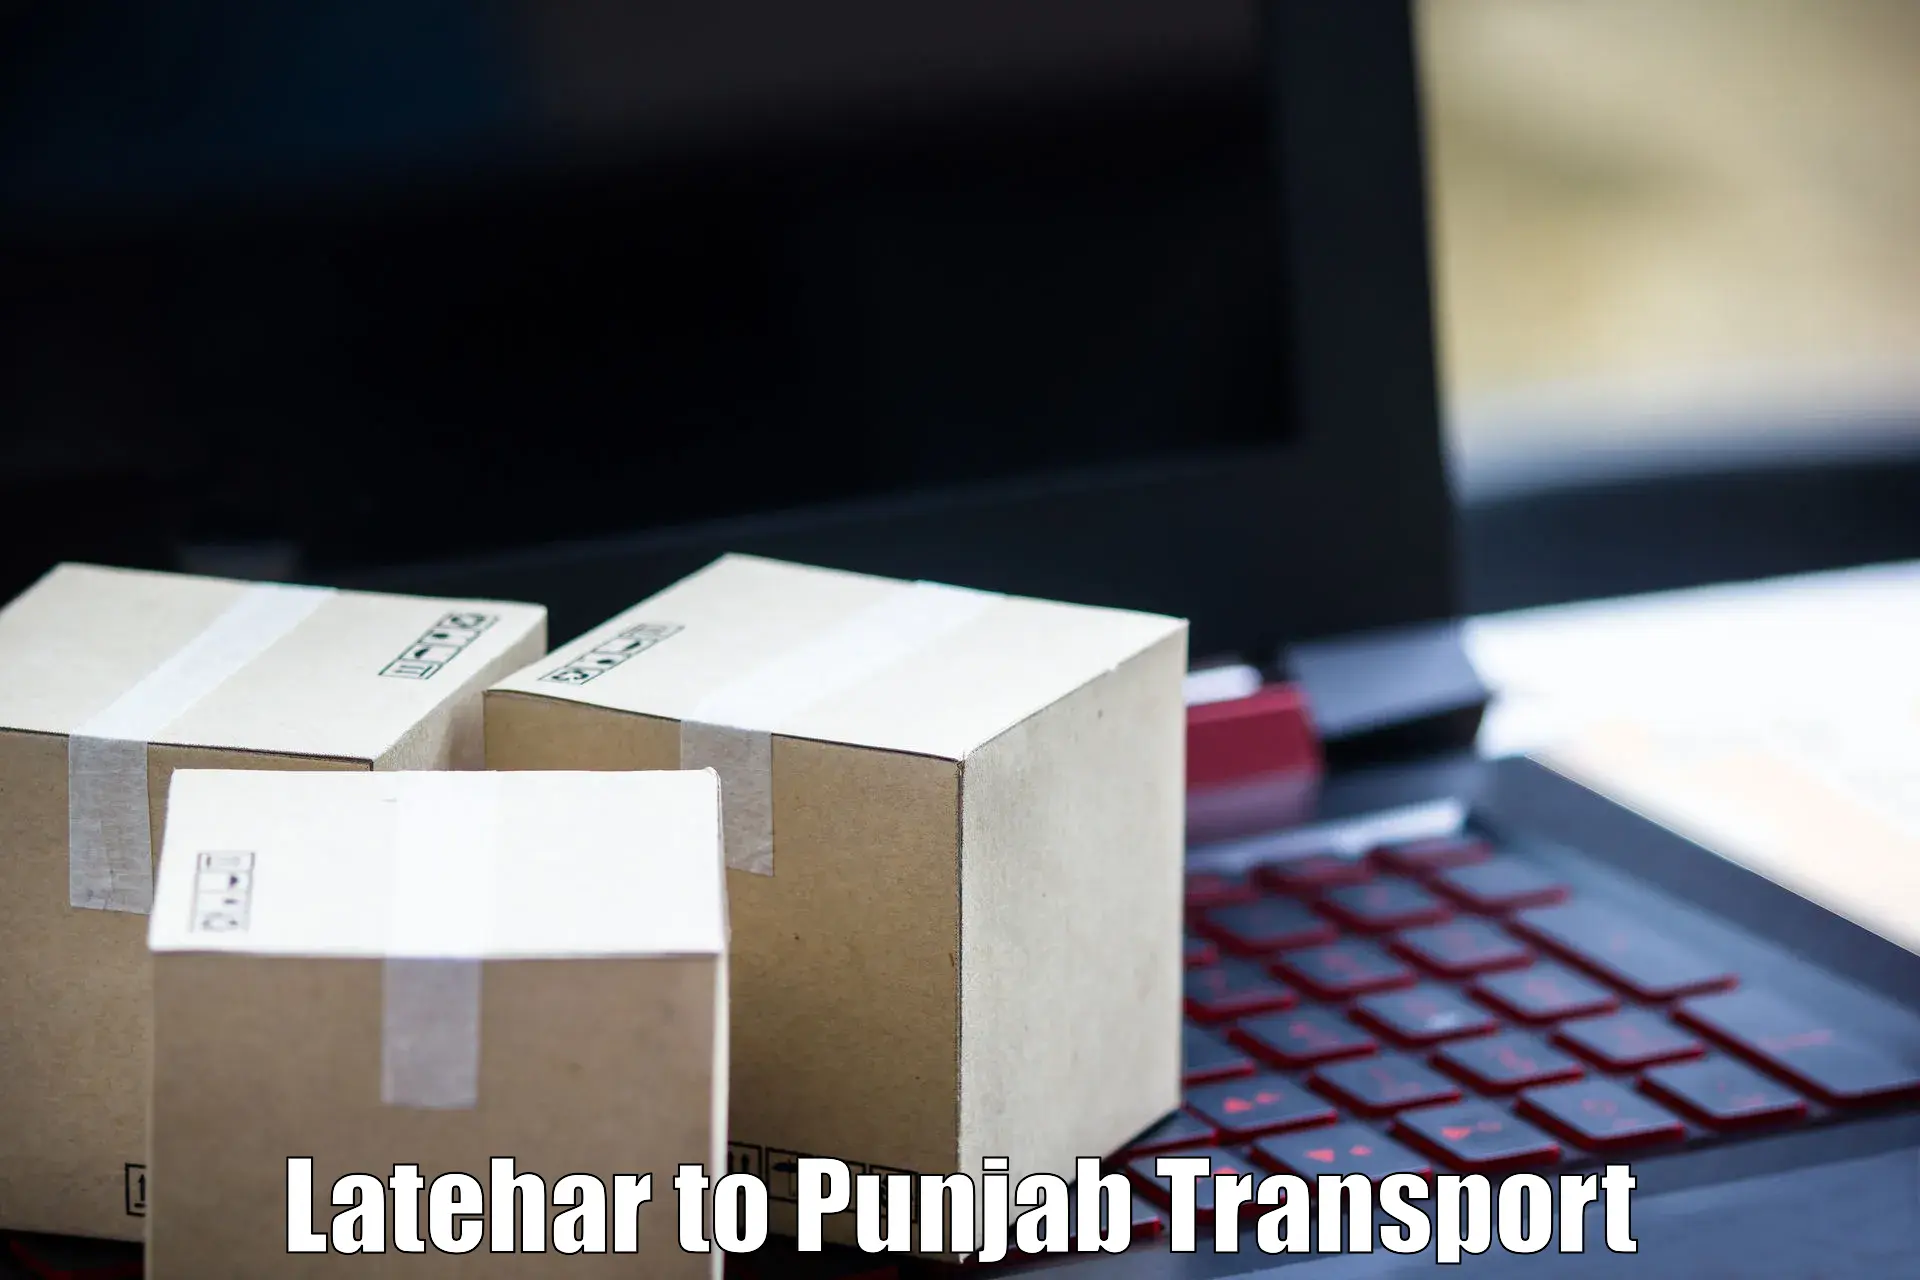 Express transport services Latehar to Pathankot